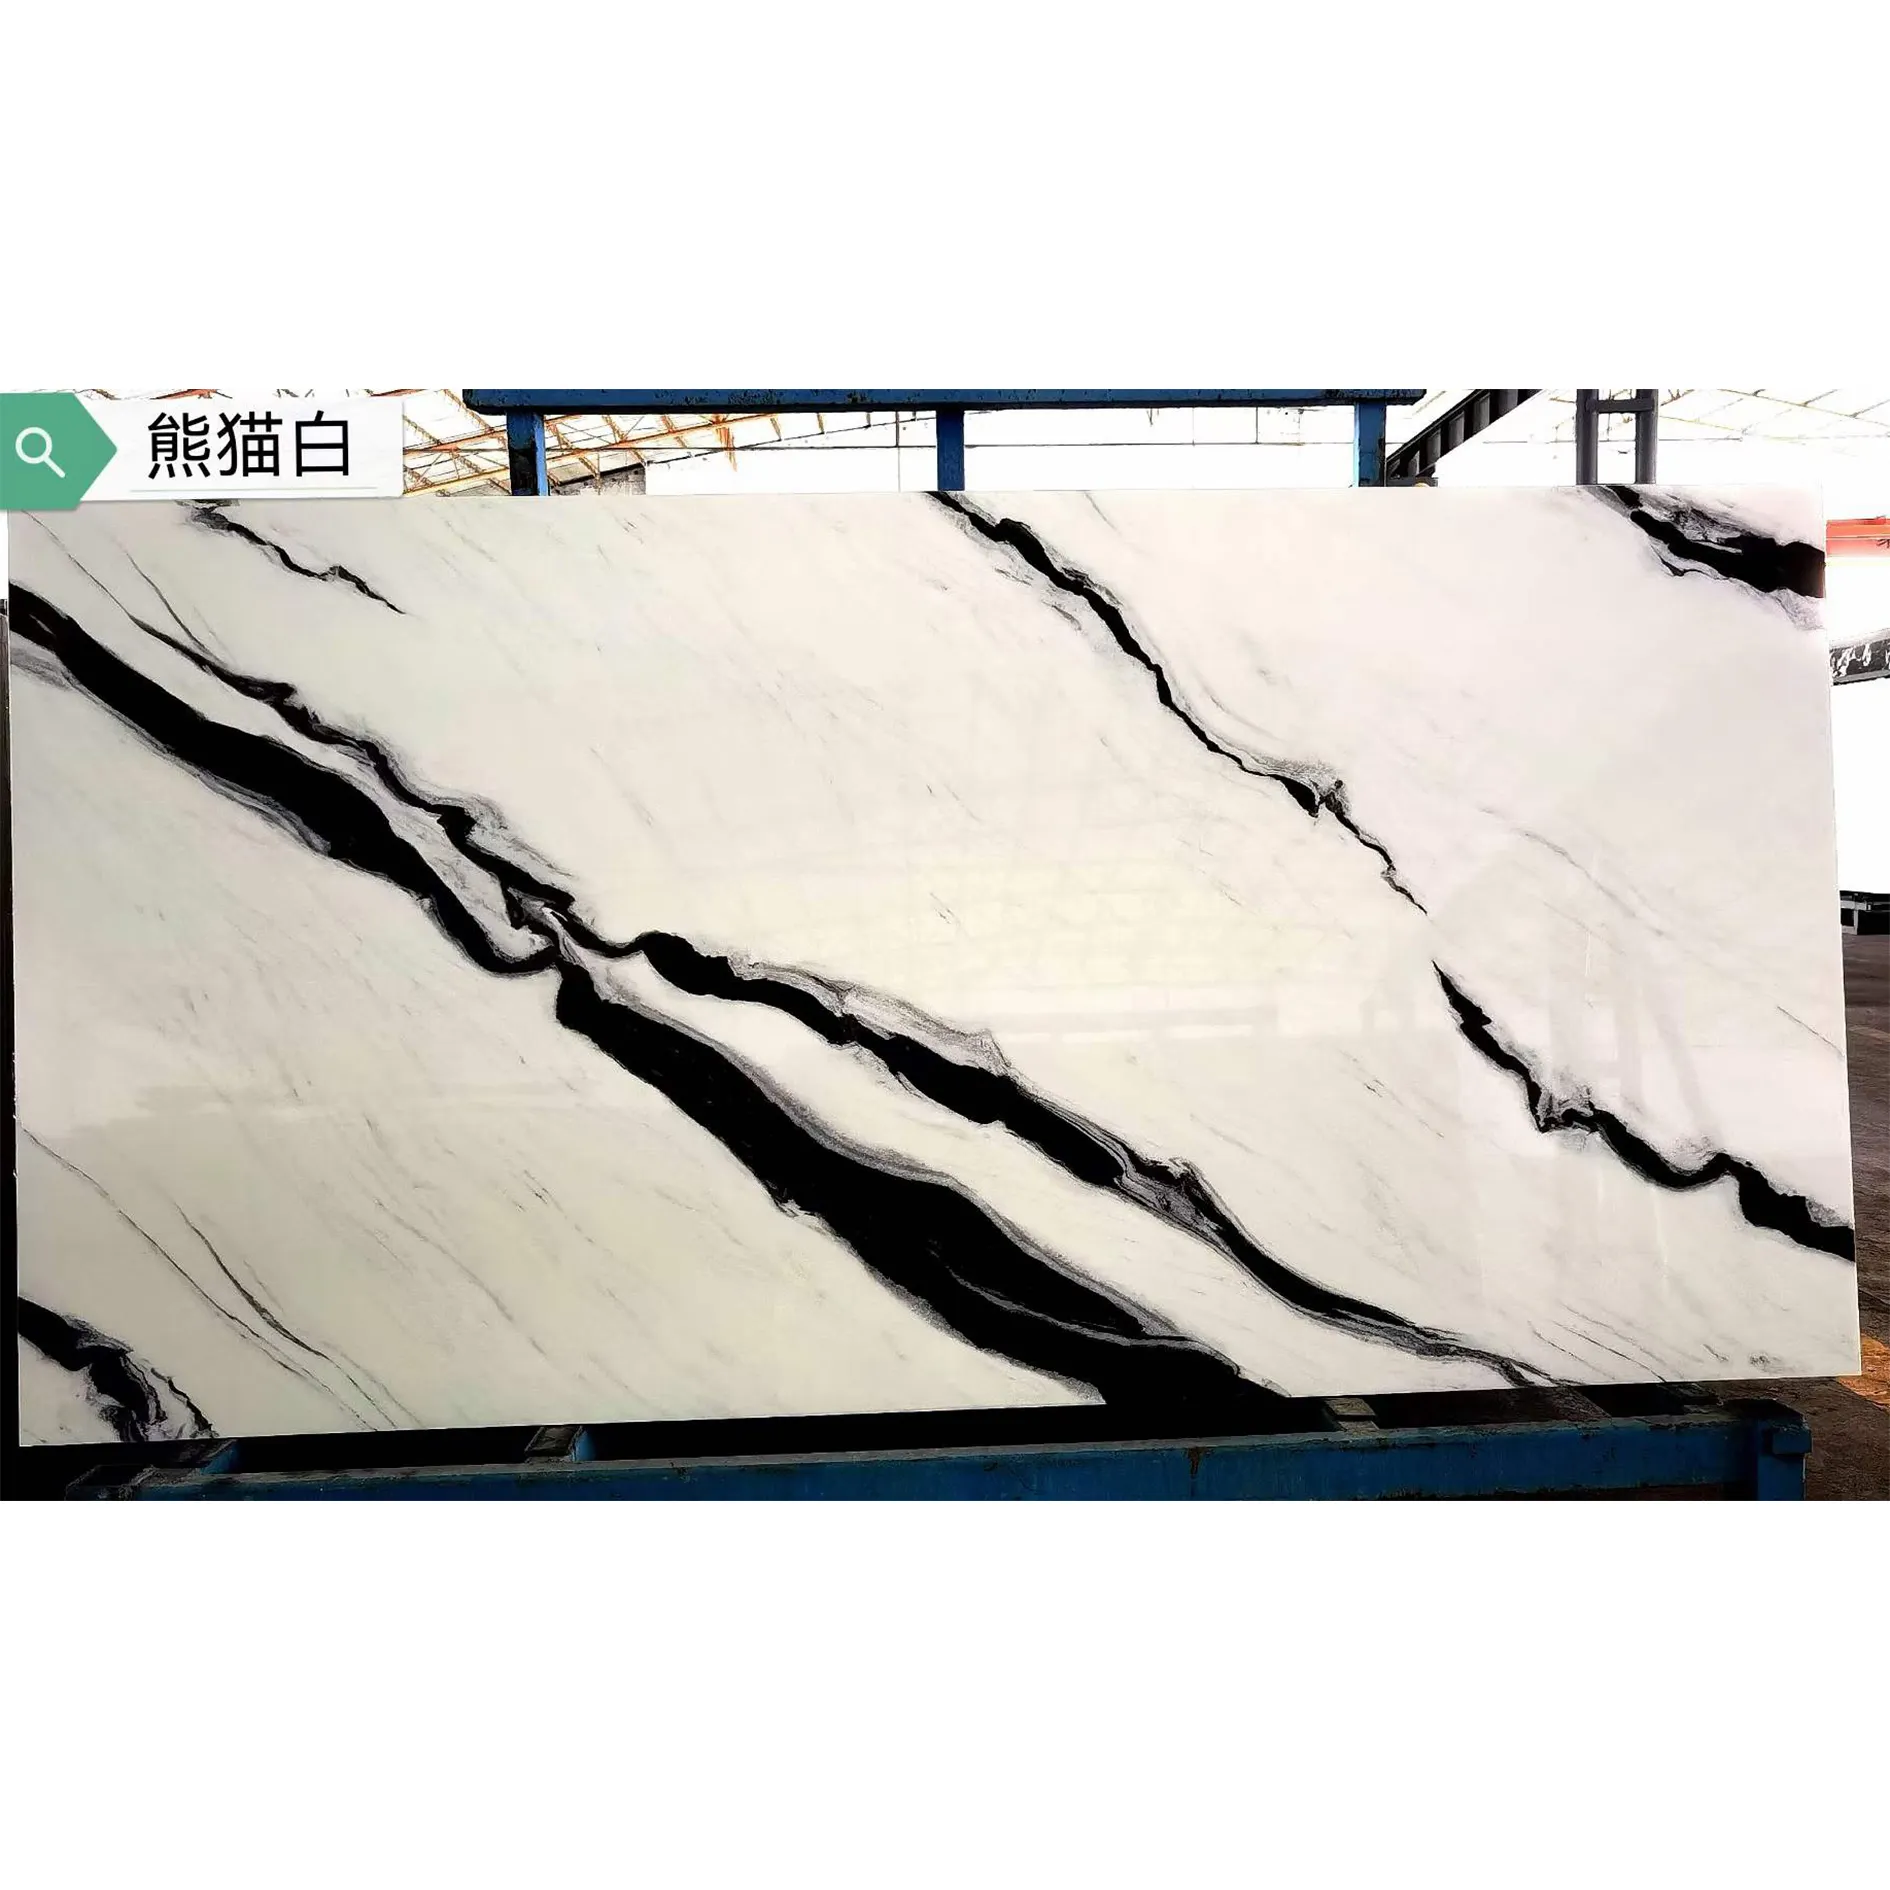 New Color 1800x900x11mm Panda White Sintered Stone Porcelain Slab Black and White Luxury Flooring Tile Kitchen Table Countertop